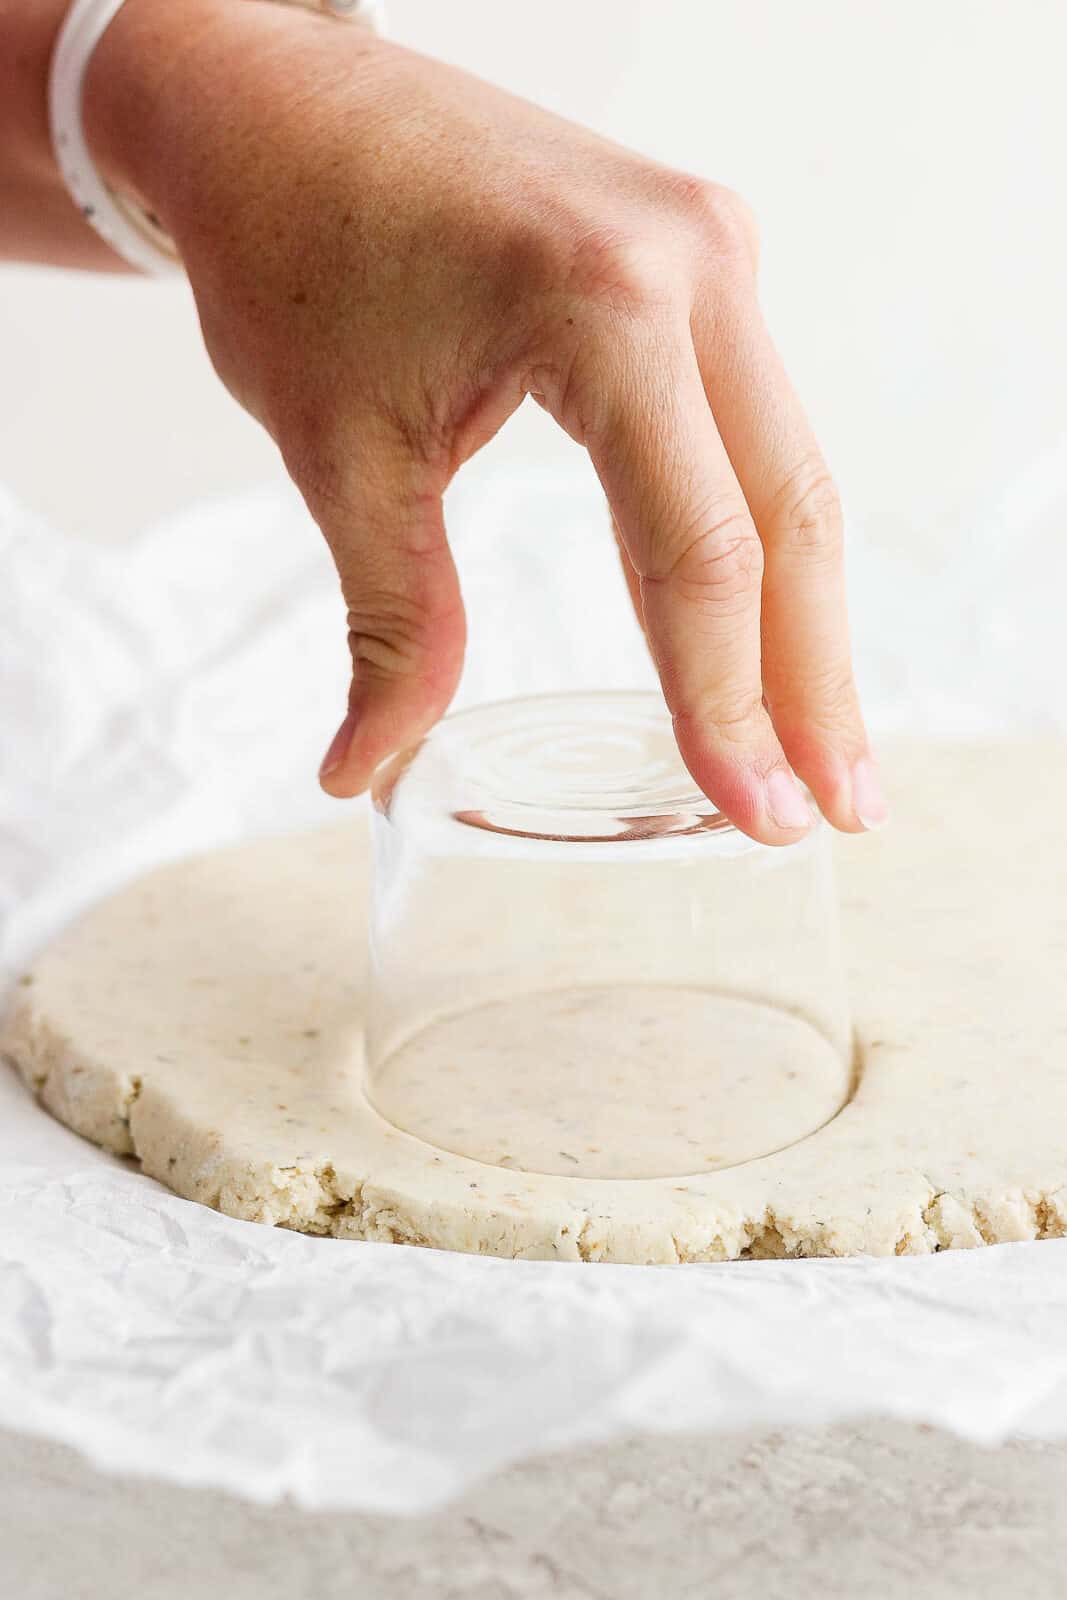 Gluten free biscuit dough being cut into circles with a small glass.